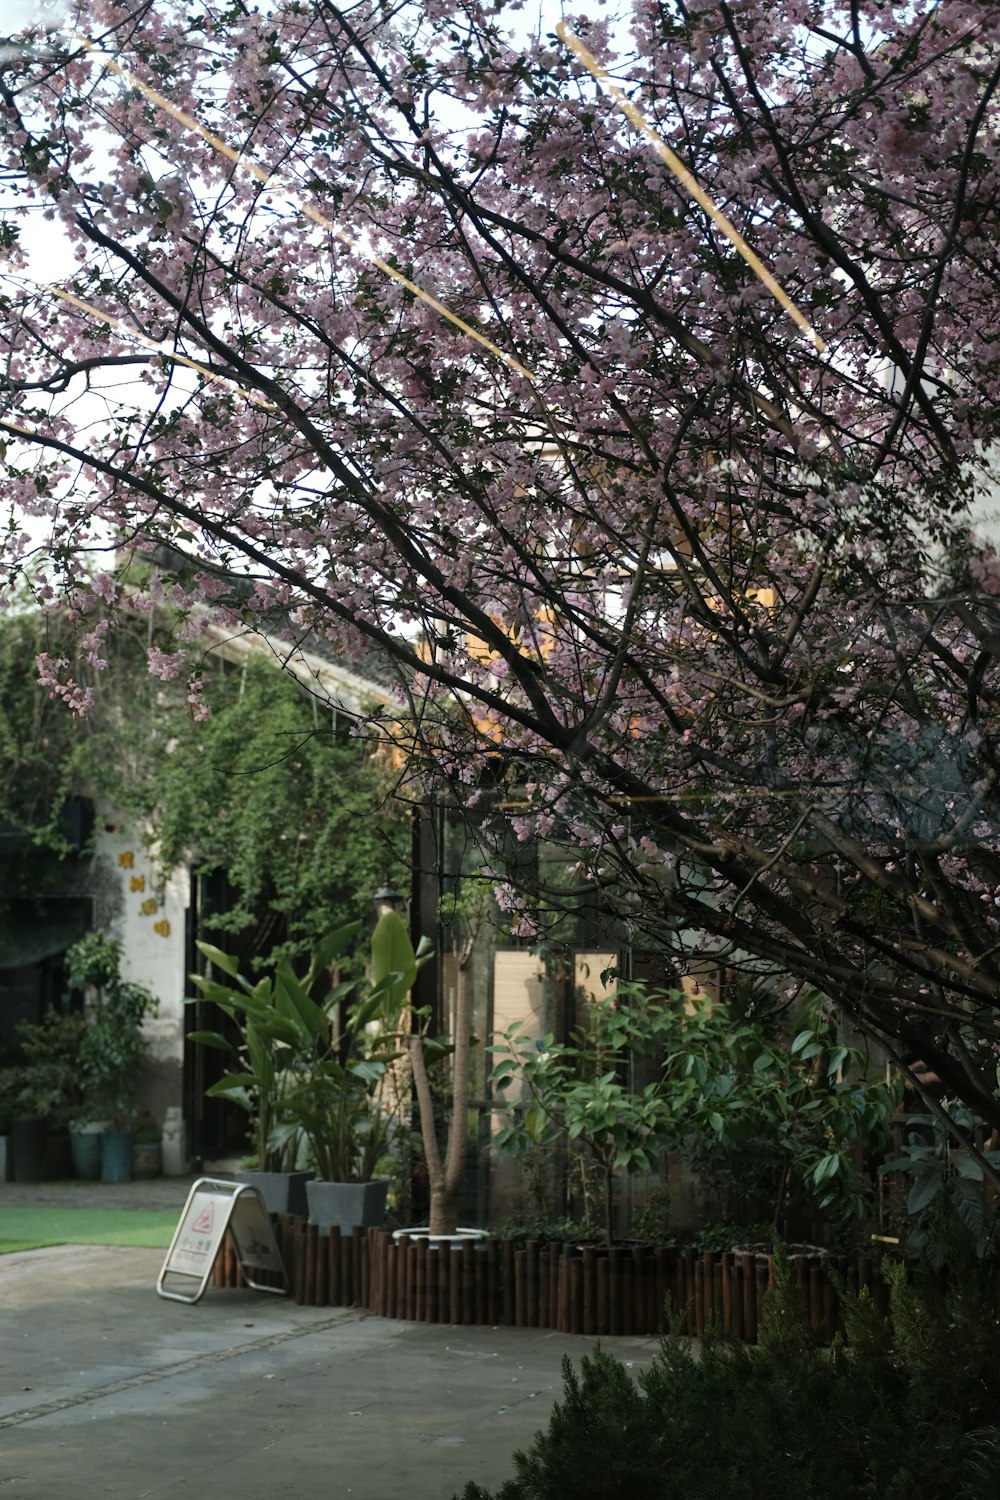 a tree with purple flowers in front of a house